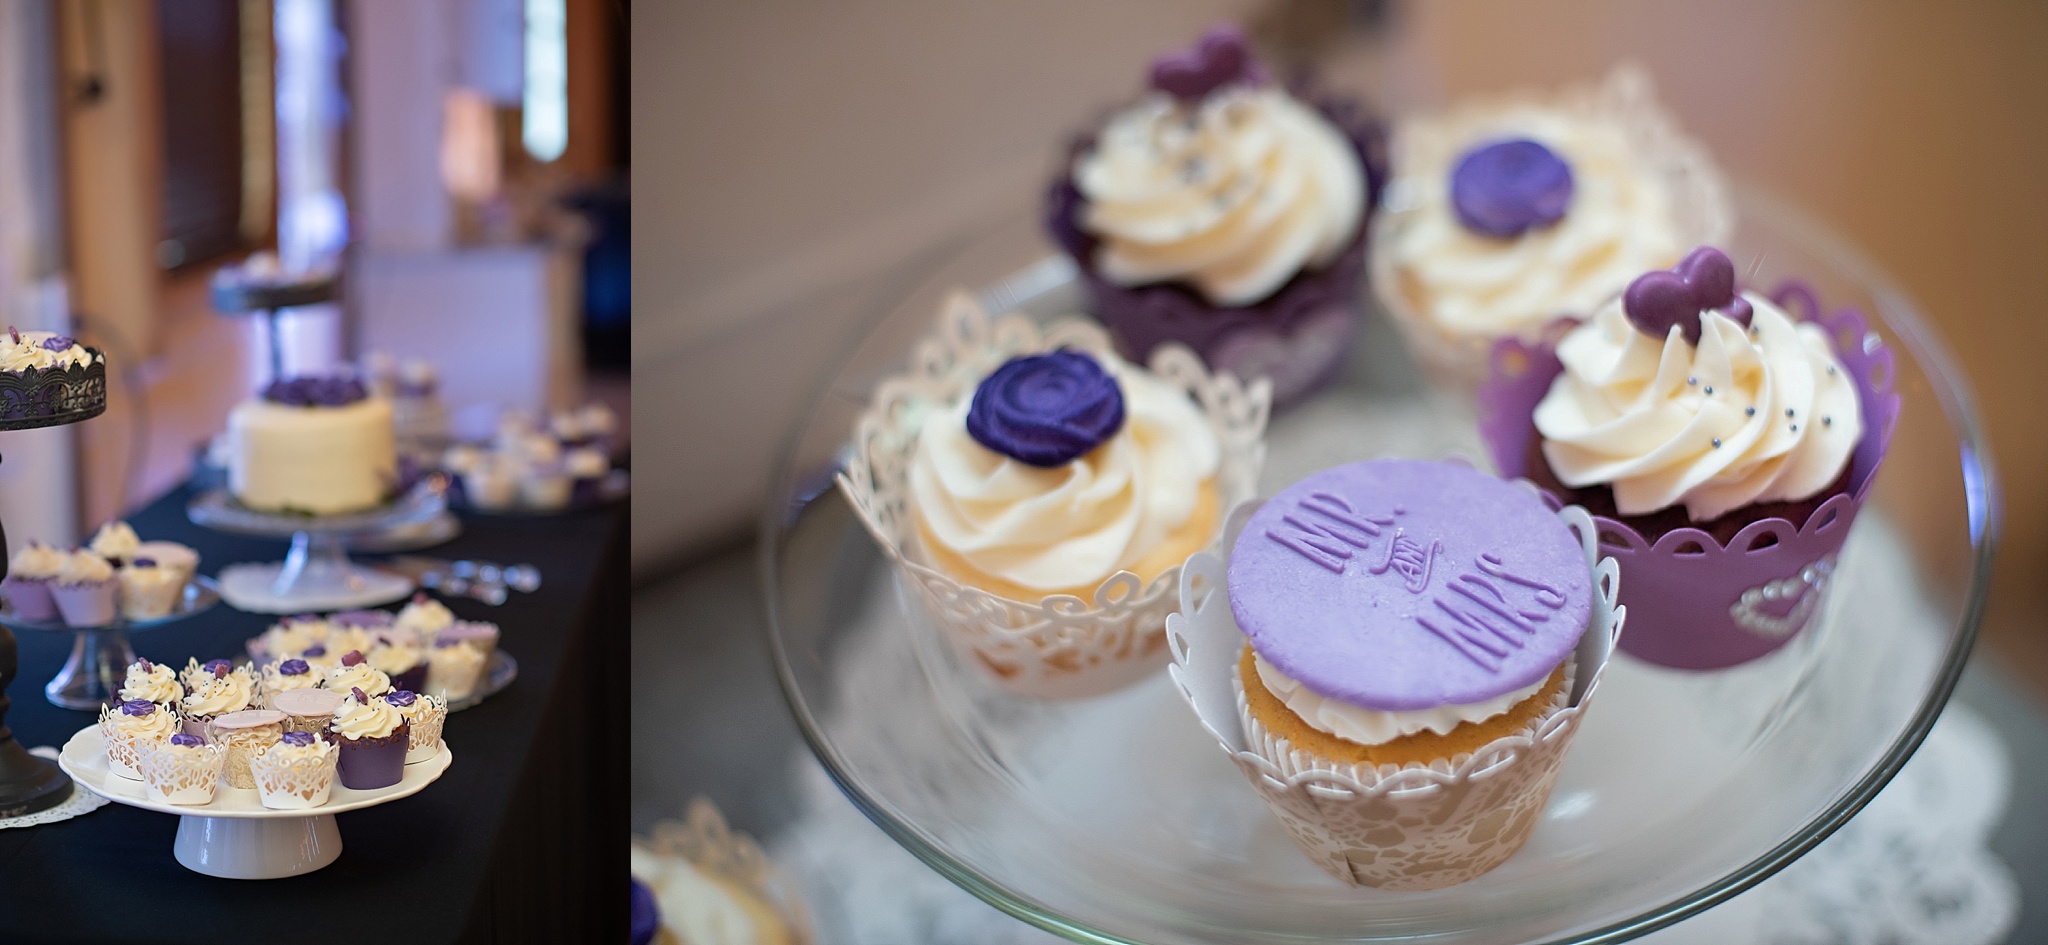 purple accent wedding cake and cupcakes